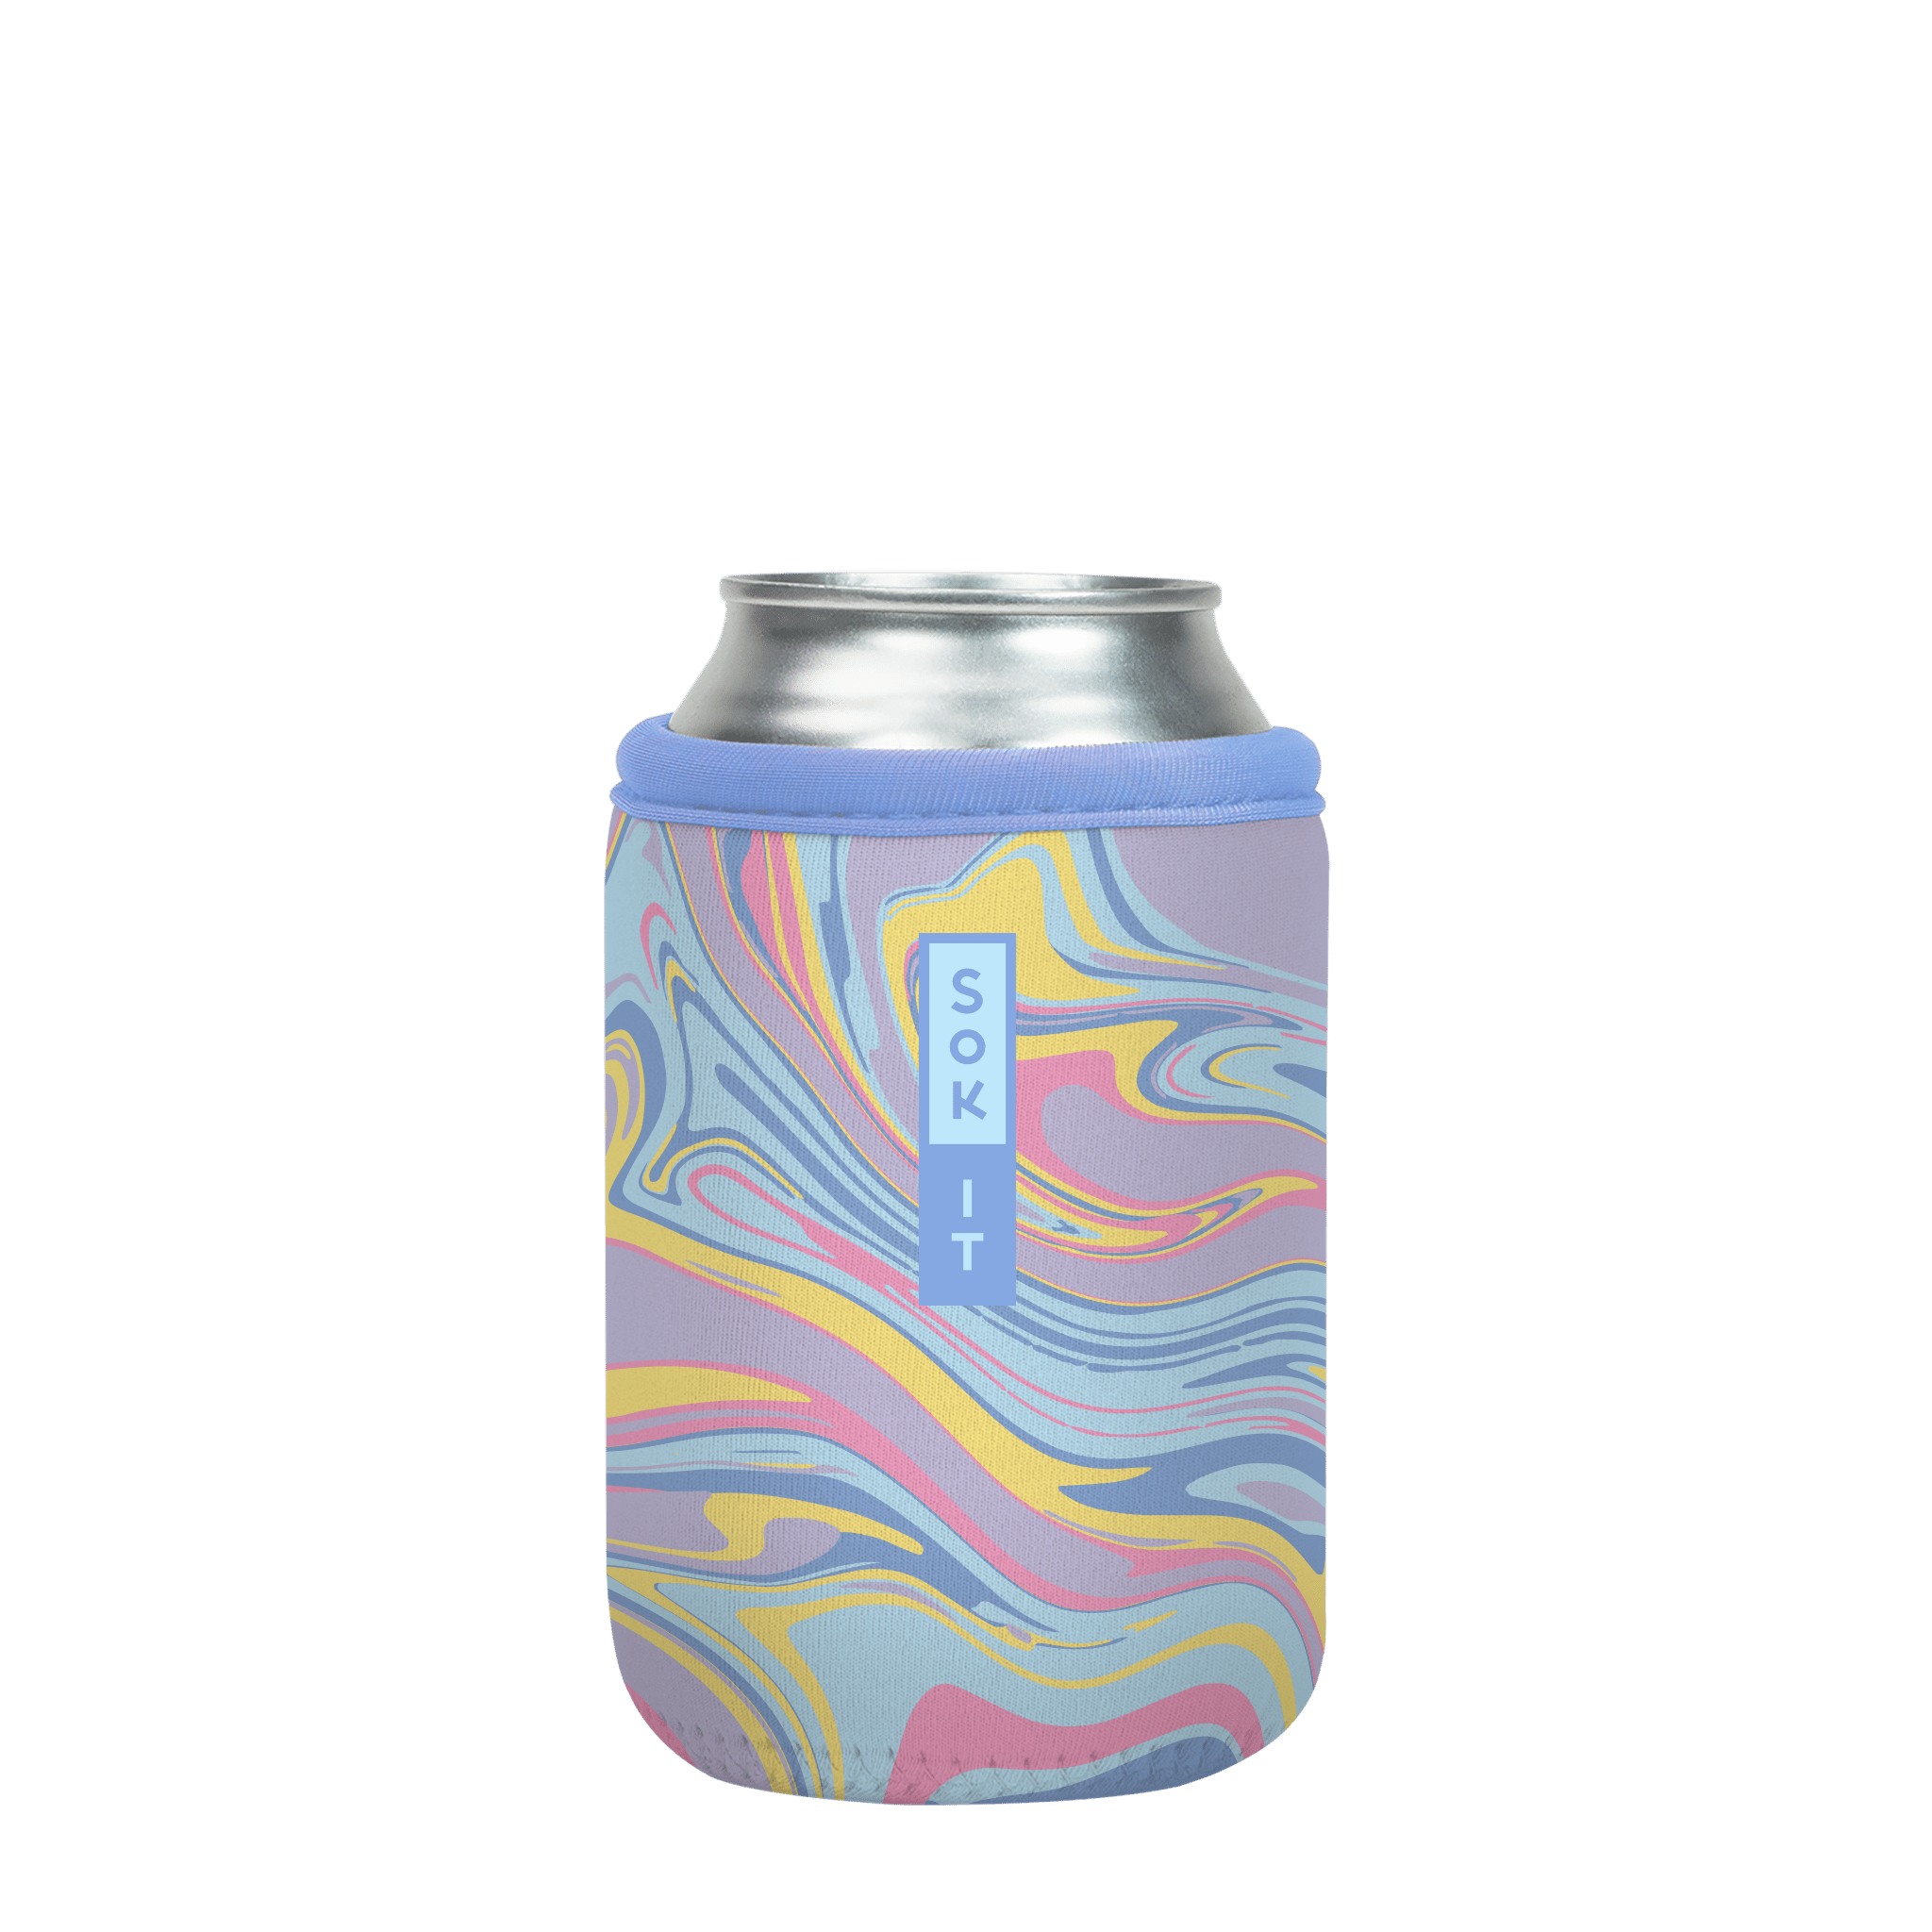 CanSok Psychedelic Swirl 12oz Can